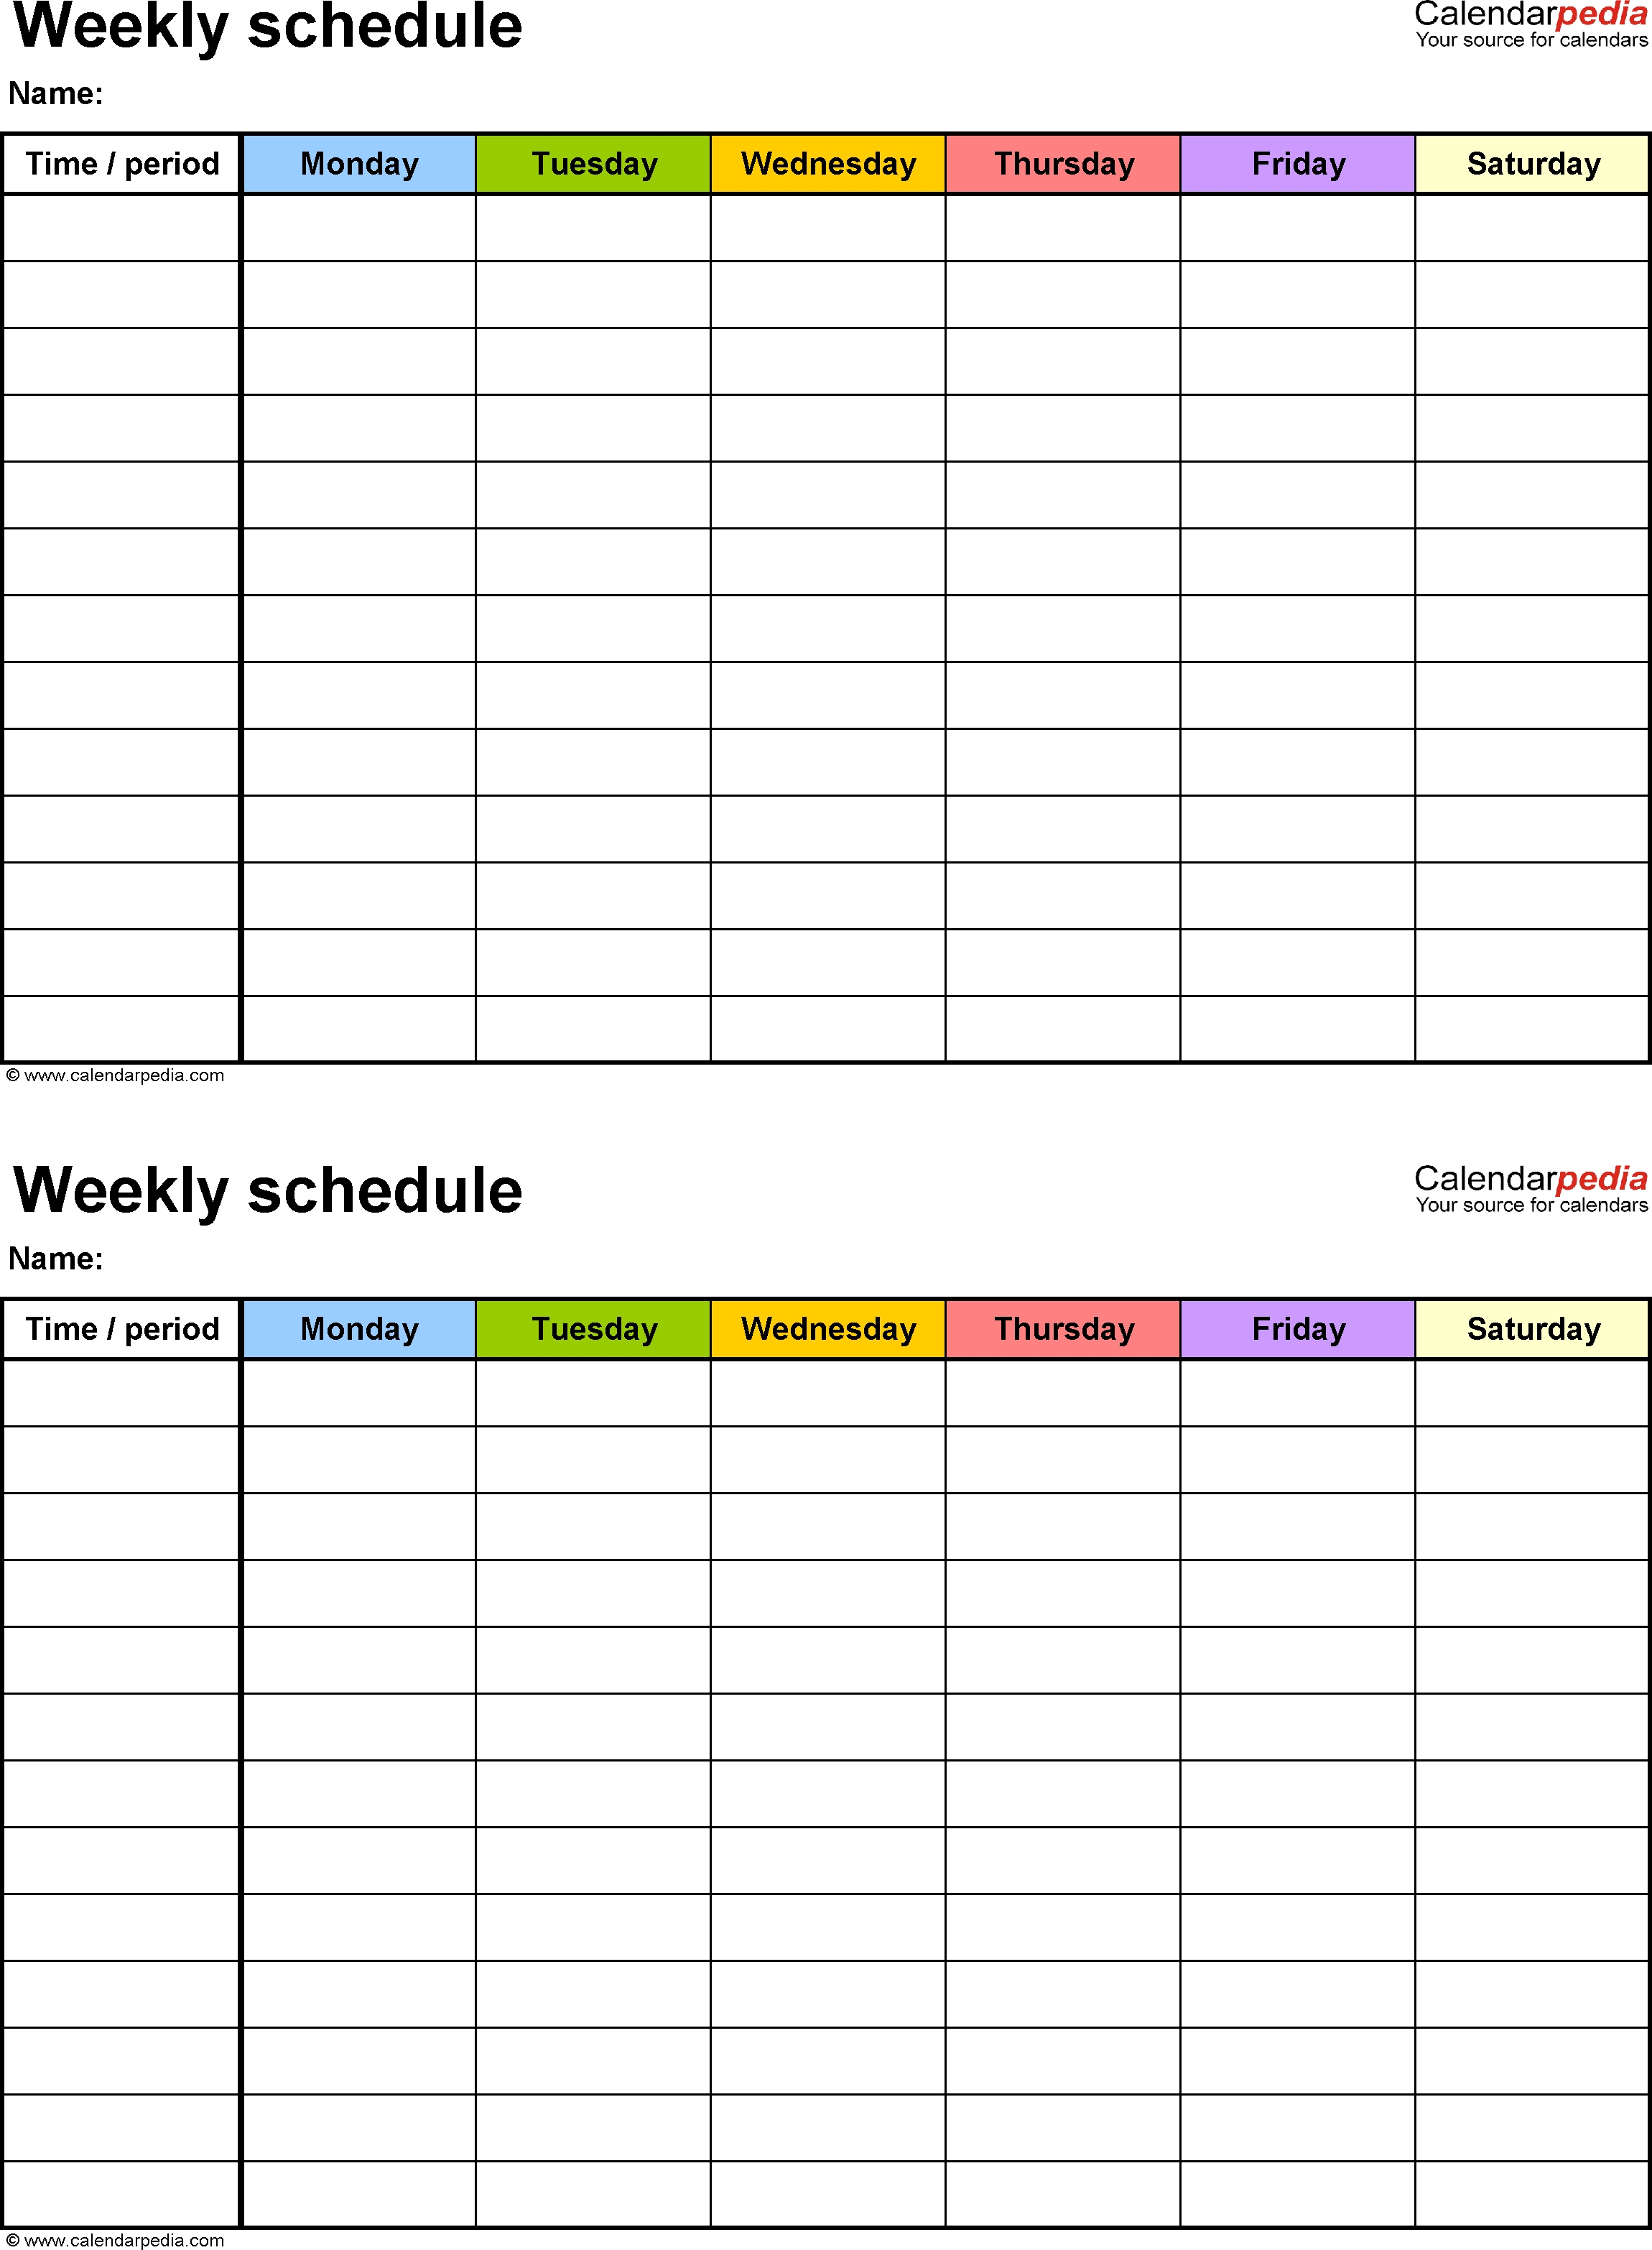 Free Weekly Schedule Templates For Pdf - 18 Templates  7 Day Weekly Planner Pdf